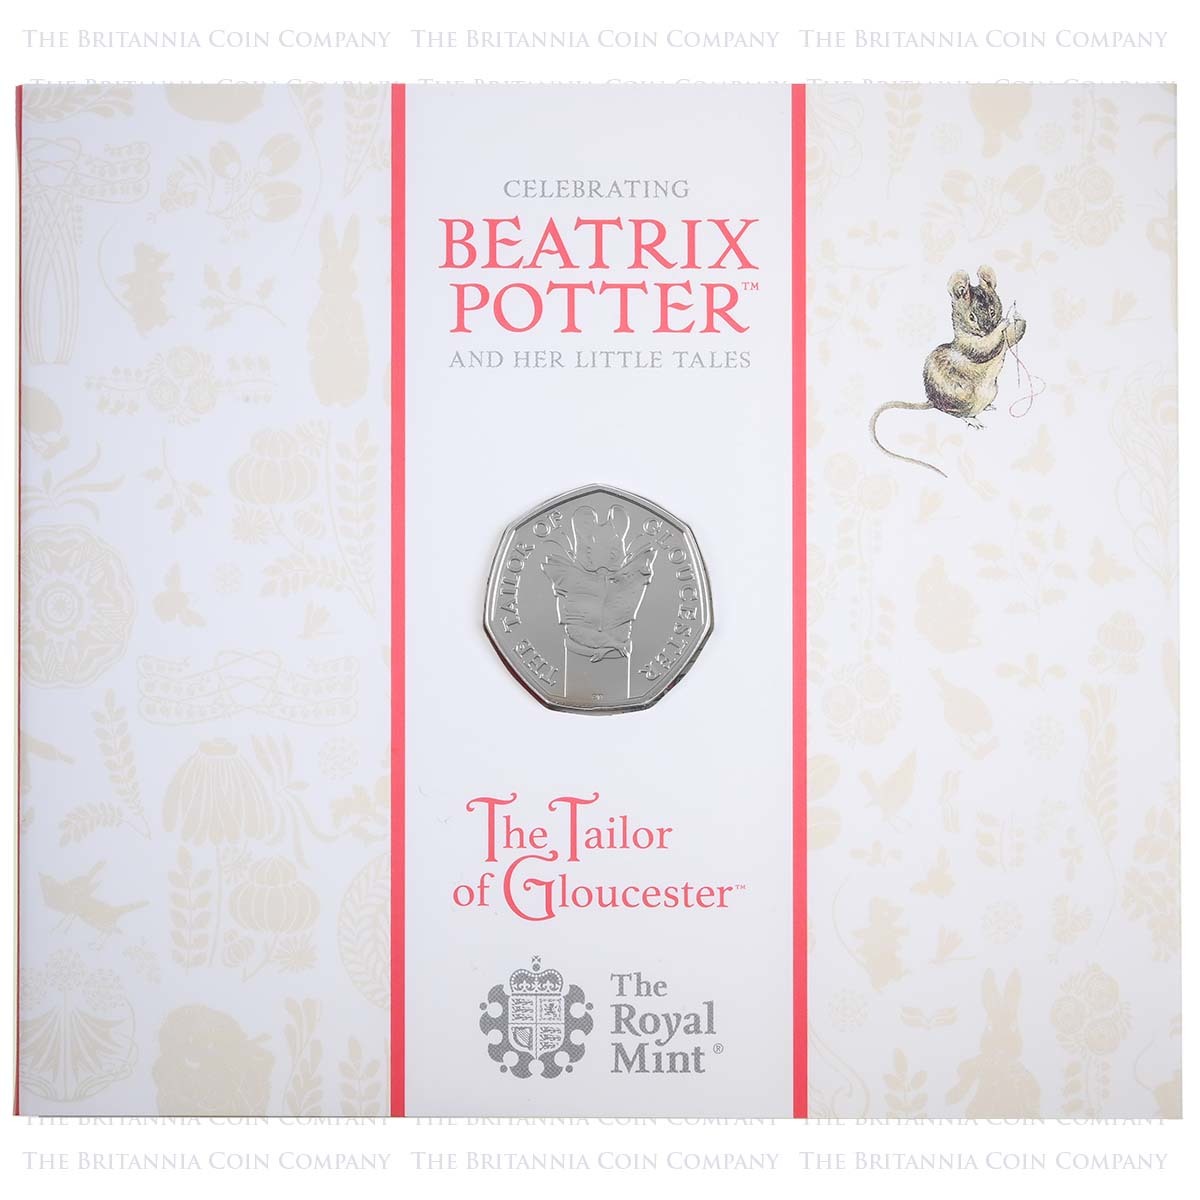 UK18TGBU 2018 Beatrix Potter Tailor Of Gloucester Fifty Pence Brilliant Uncirculated Coin In Folder Packaging